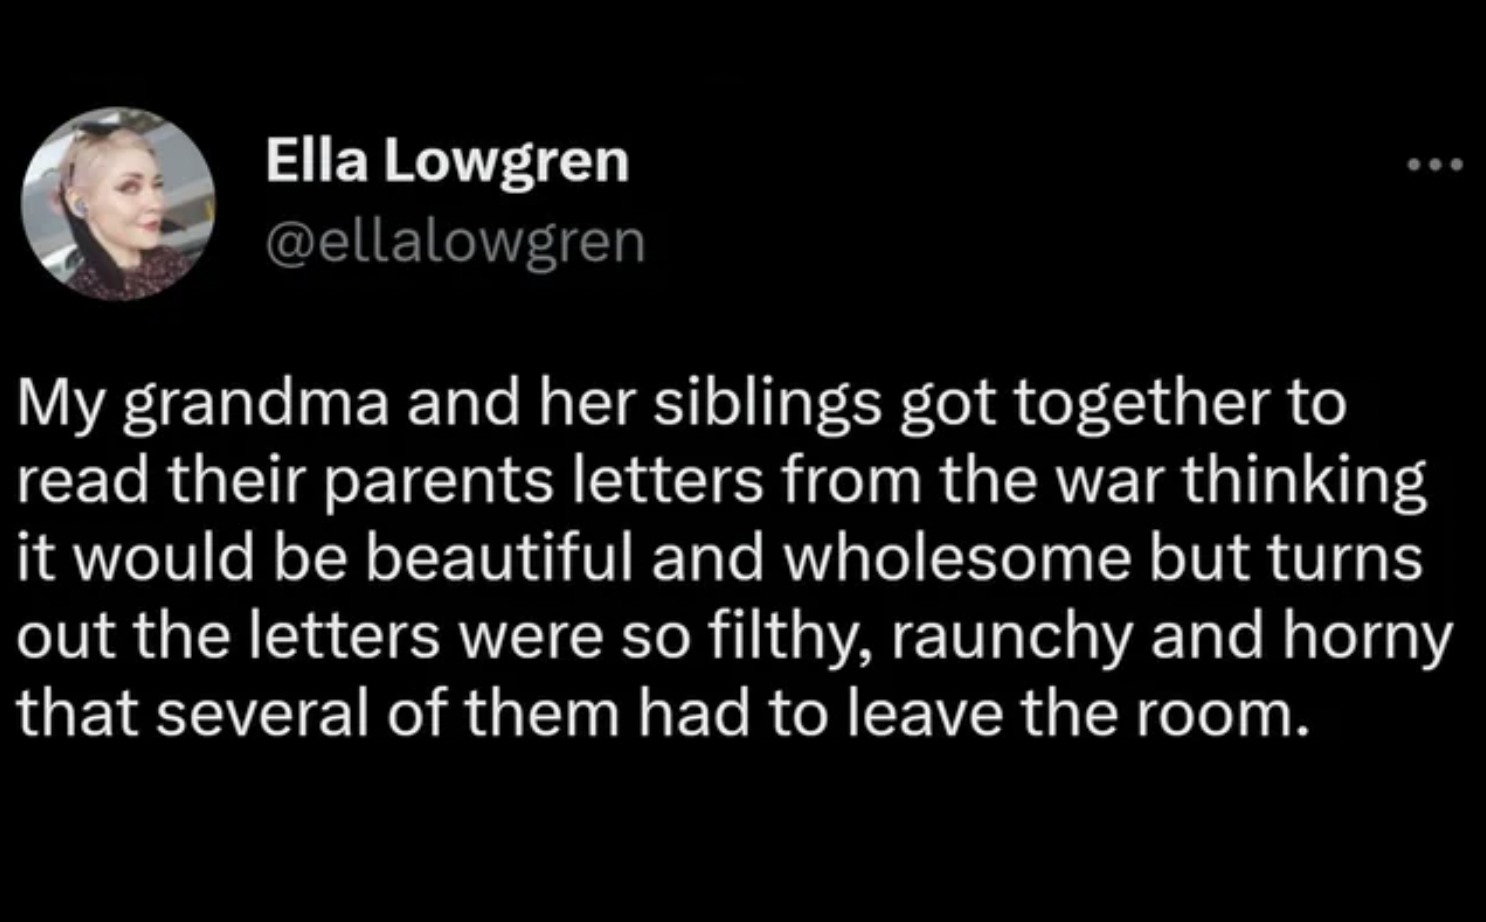 Cringe pics - sorry im a gemini meme - Ella Lowgren My grandma and her siblings got together to read their parents letters from the war thinking it would be beautiful and wholesome but turns out the letters were so filthy, raunchy and horny that several o